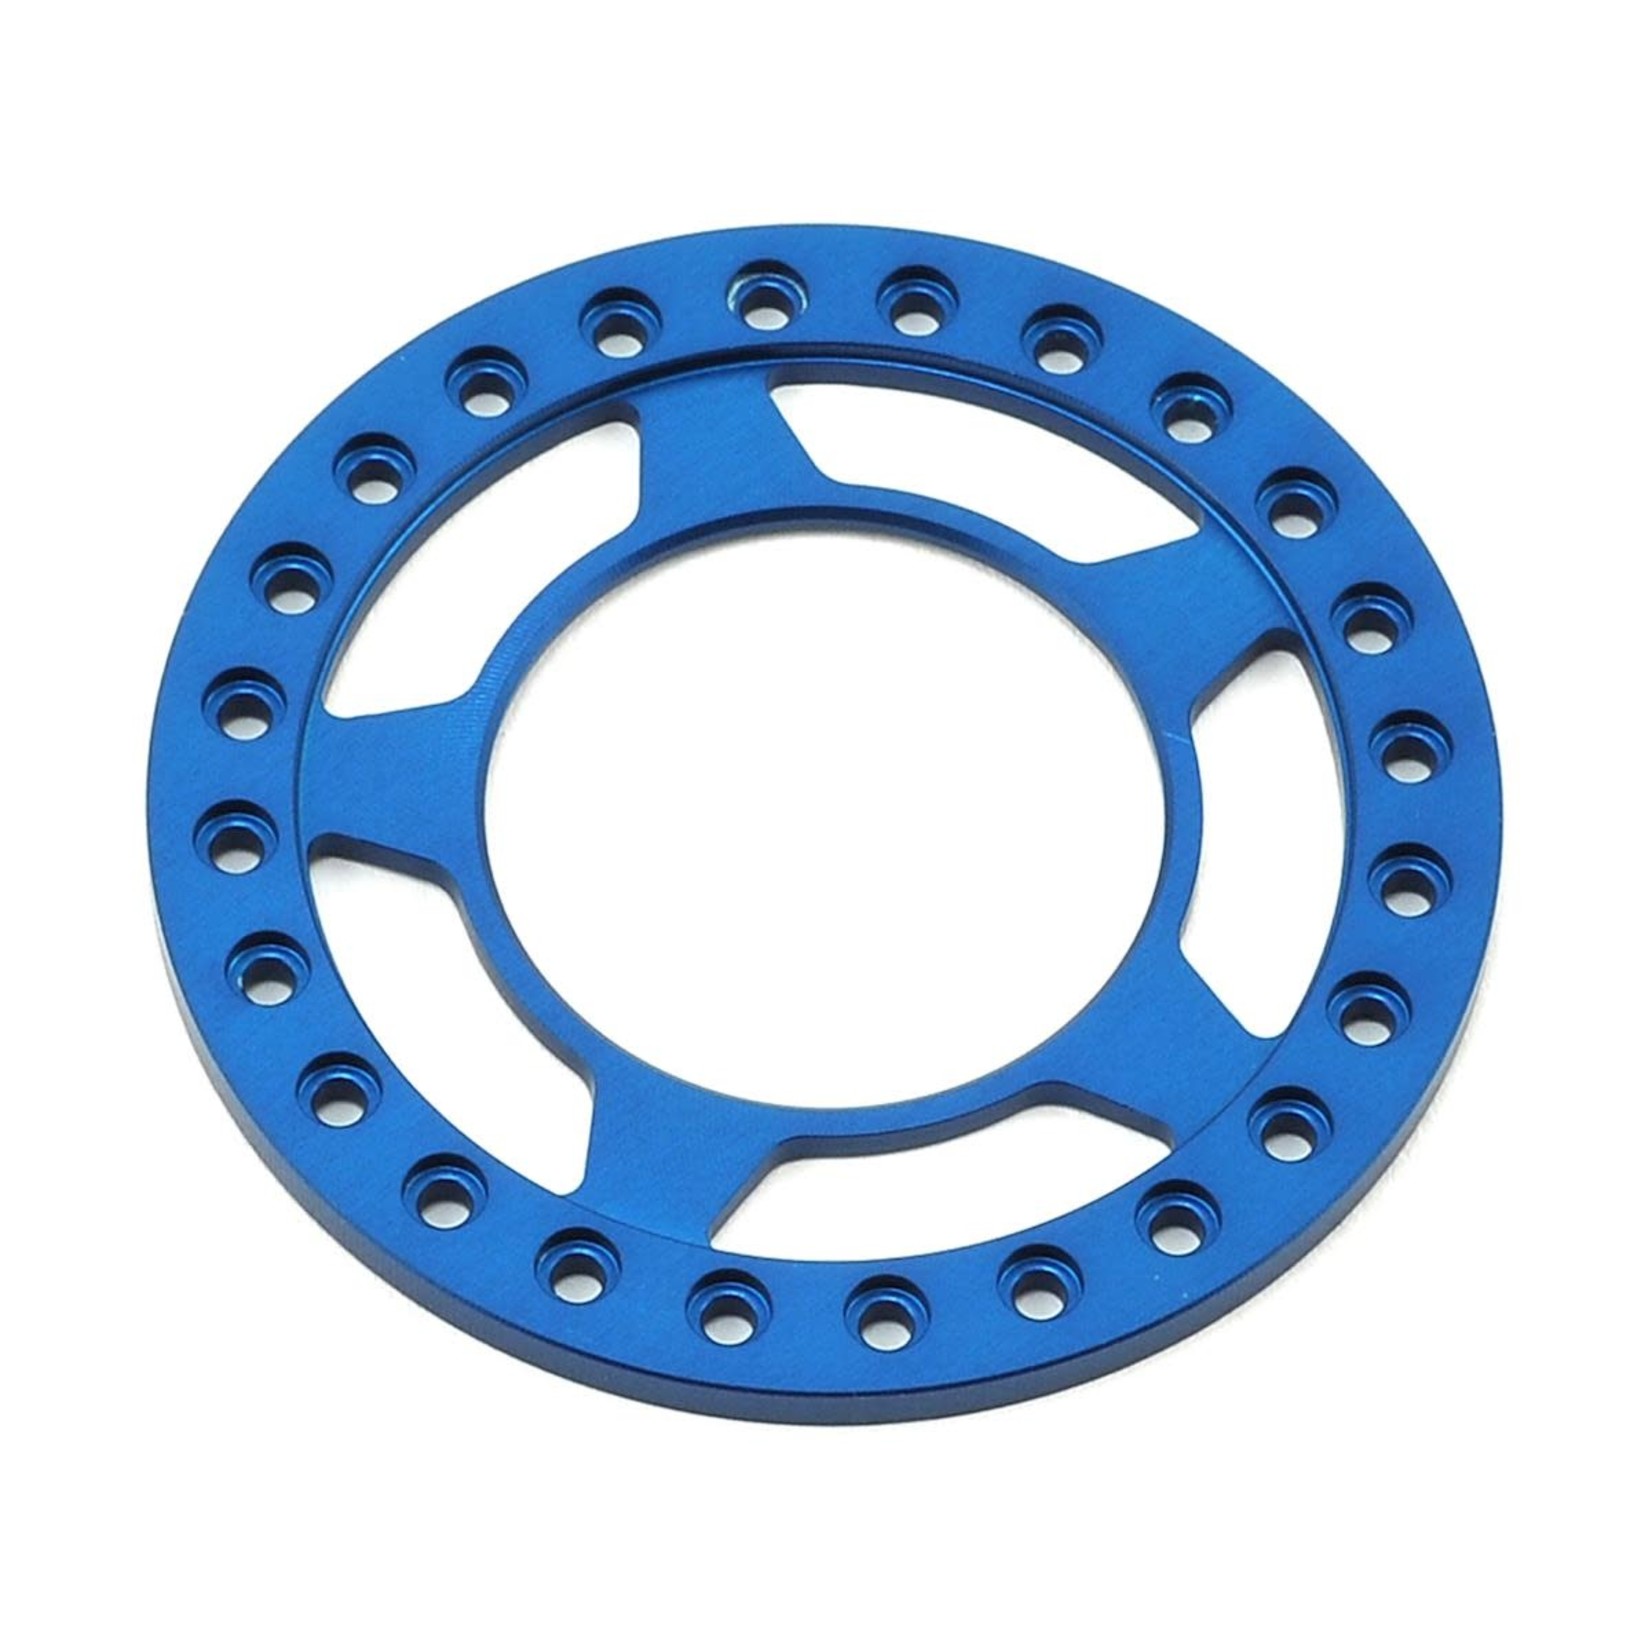 Vanquish Products Vanquish Products Spyder 1.9" Beadlock Ring (Blue) #VPS05144